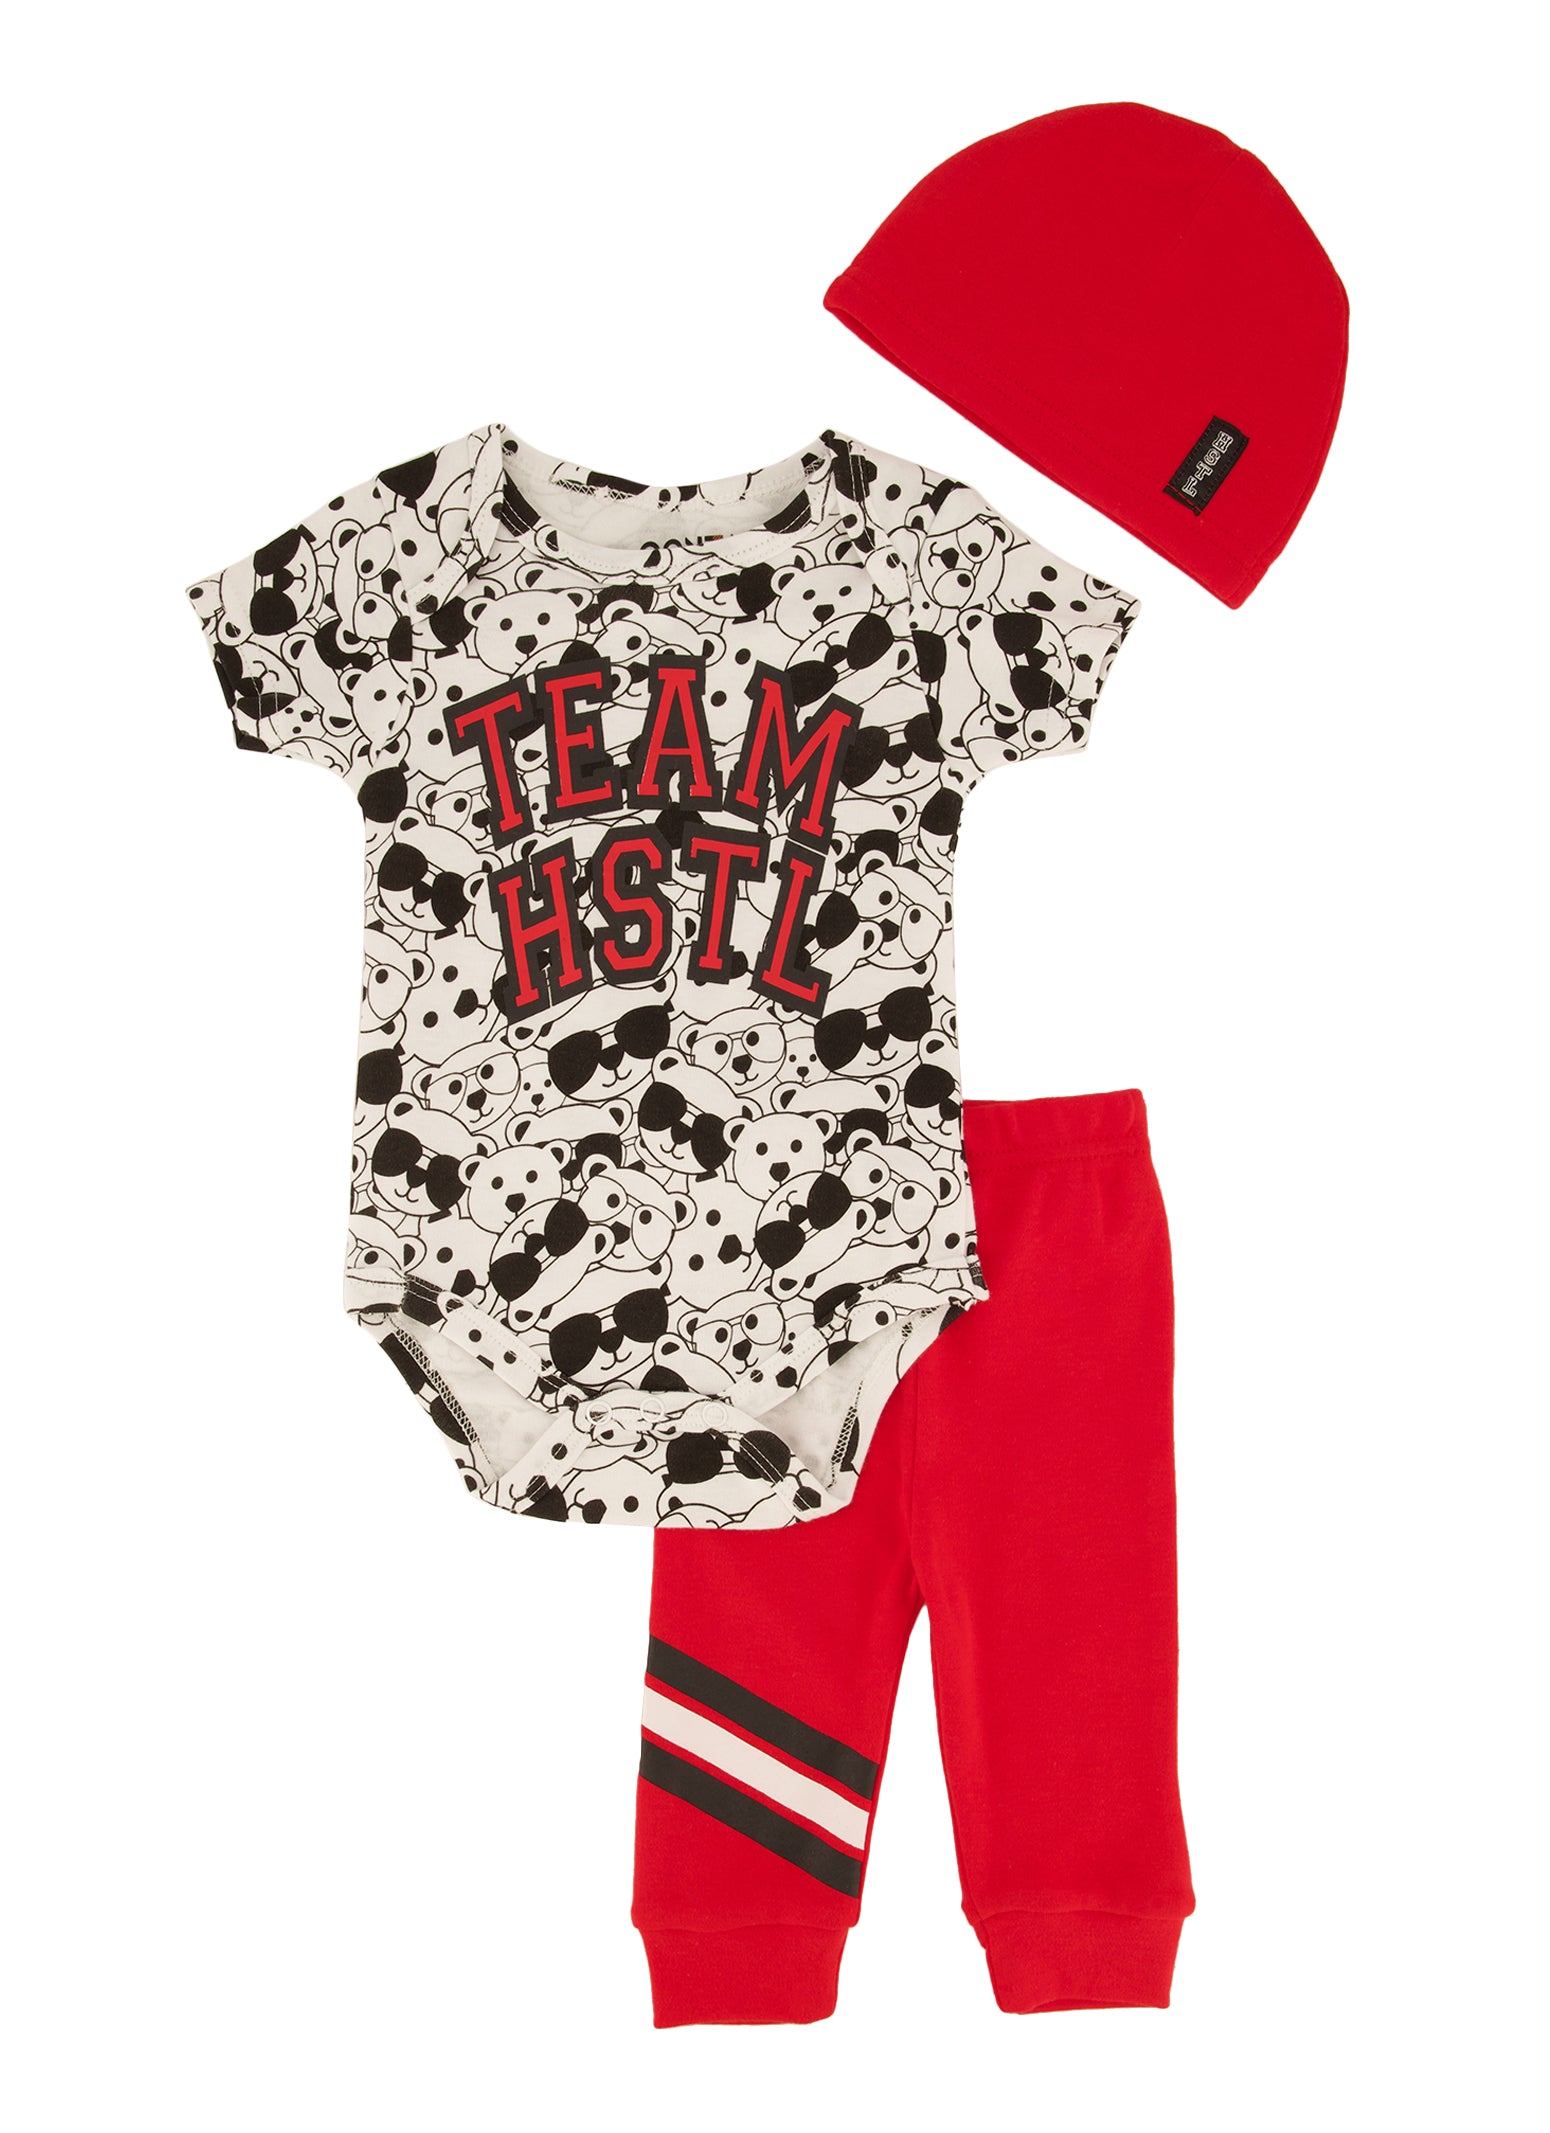 Baby Boys 0-9M Team Hstl Bear Printed Graphic Bodysuit with Joggers and Beanie, Red, Size 0-3M